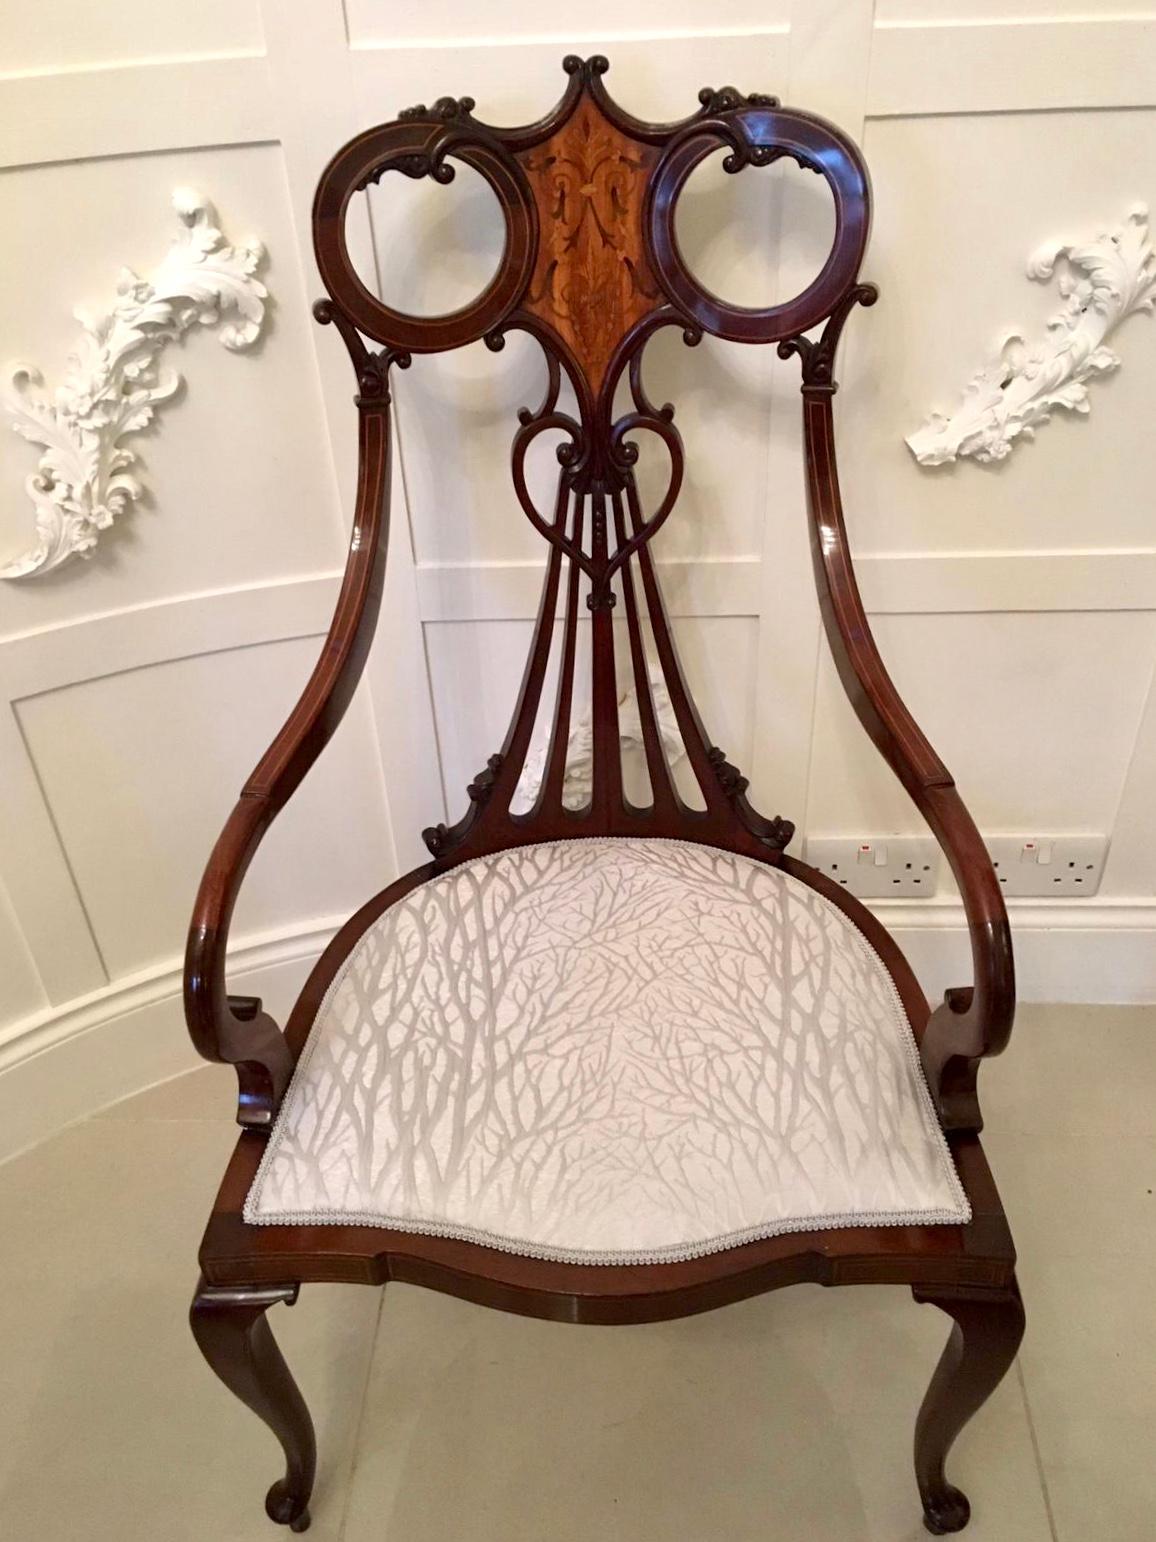 Outstanding antique 19th century Victorian antique mahogany inlaid armchair having an unusual beautifully shaped top rail with a quality satinwood inlaid panel. It boasts a pretty heart shaped carved centre splatt to the back. The open arms are